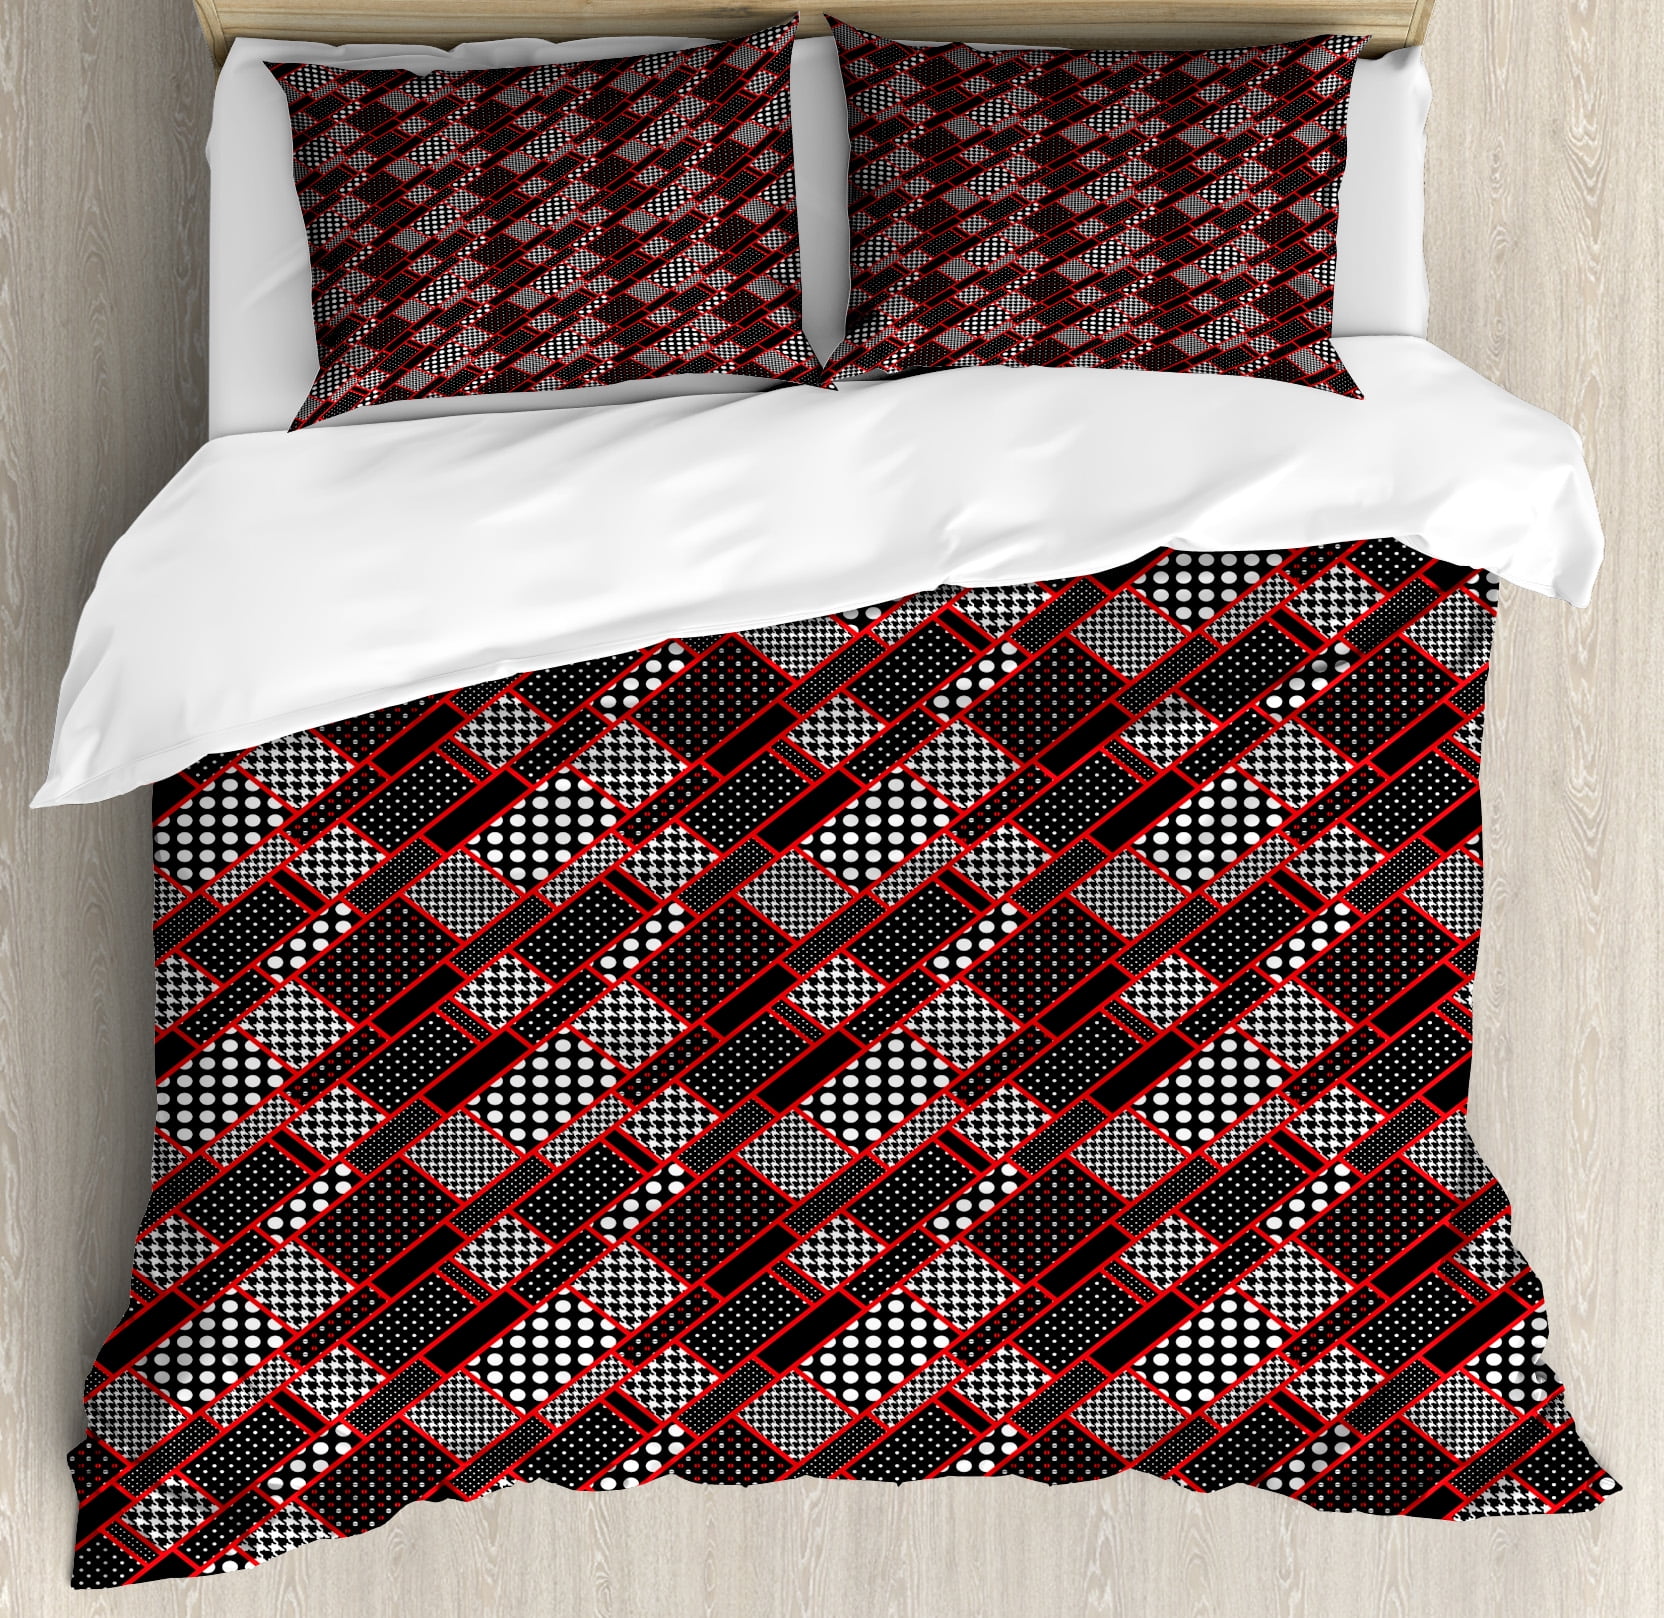 Red And Black King Size Duvet Cover Set Geometric Rectangle